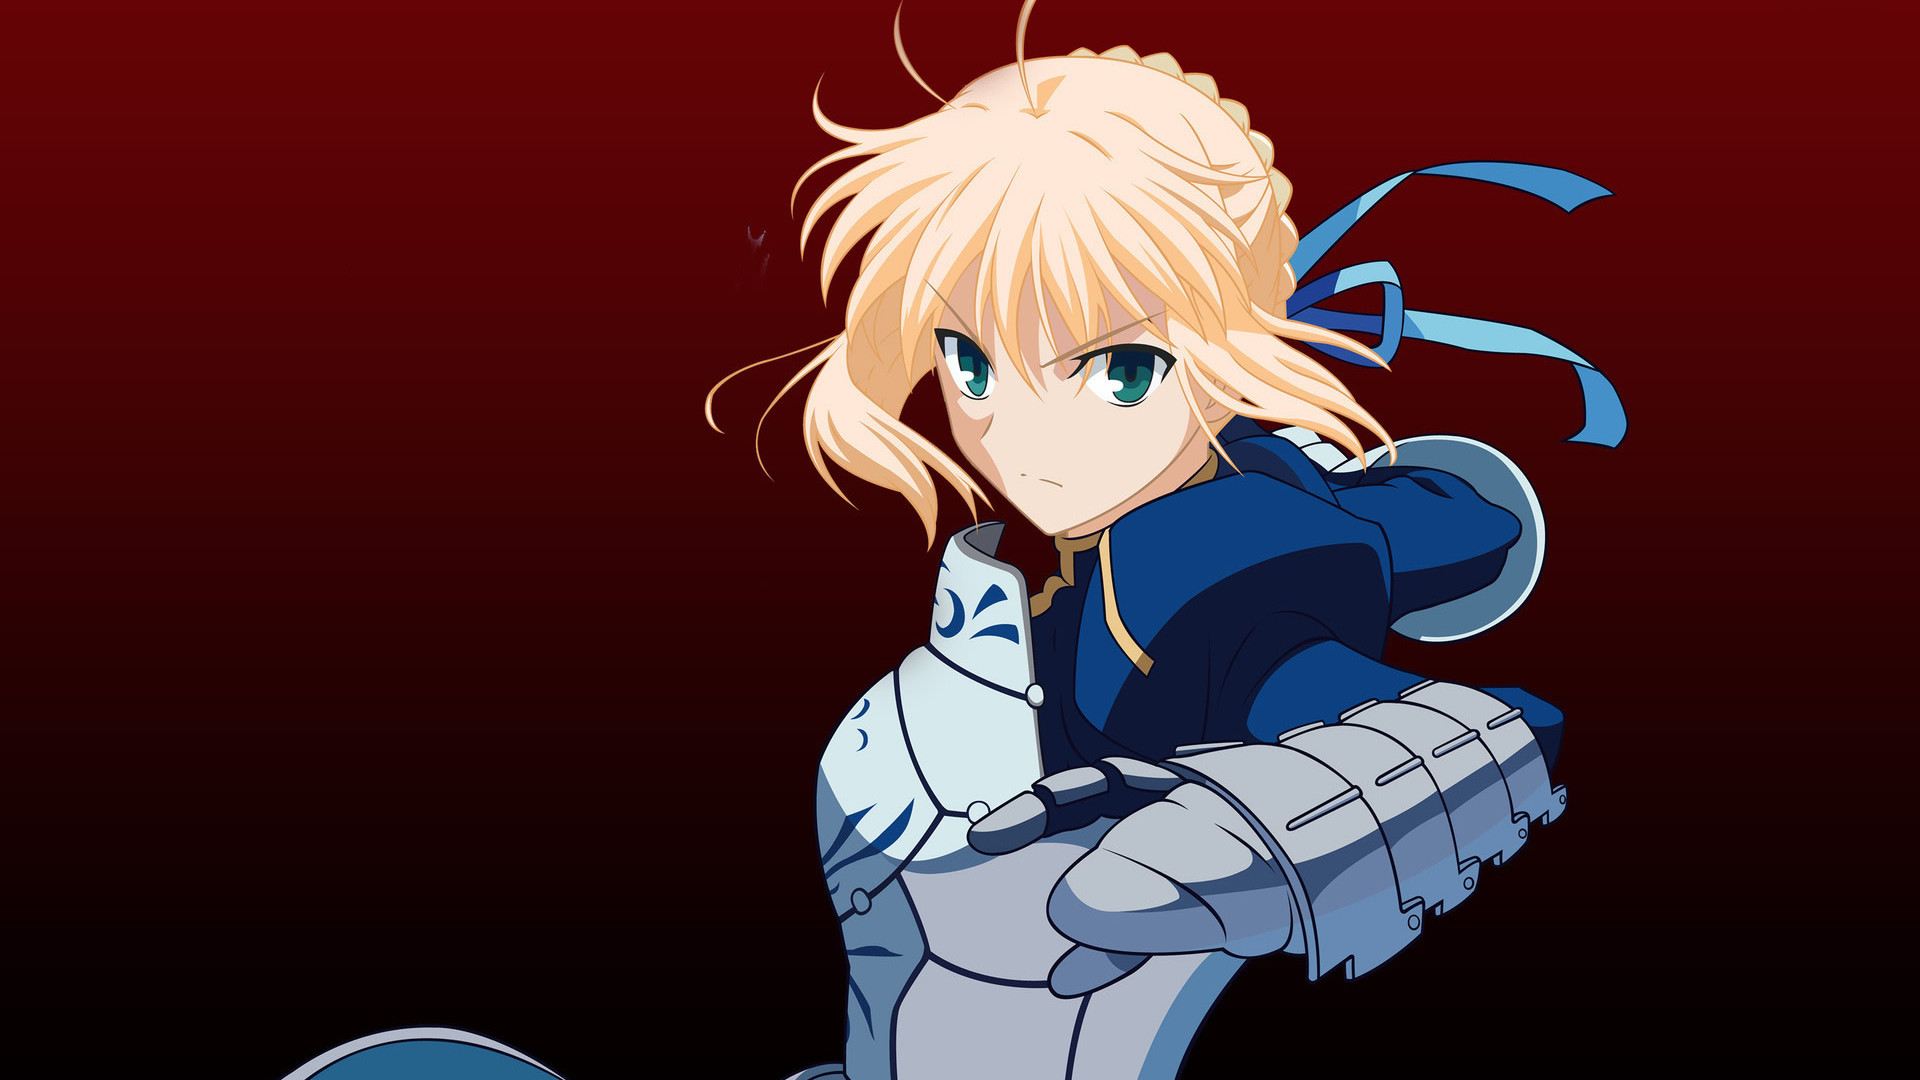 Saber - Fate Stay Night